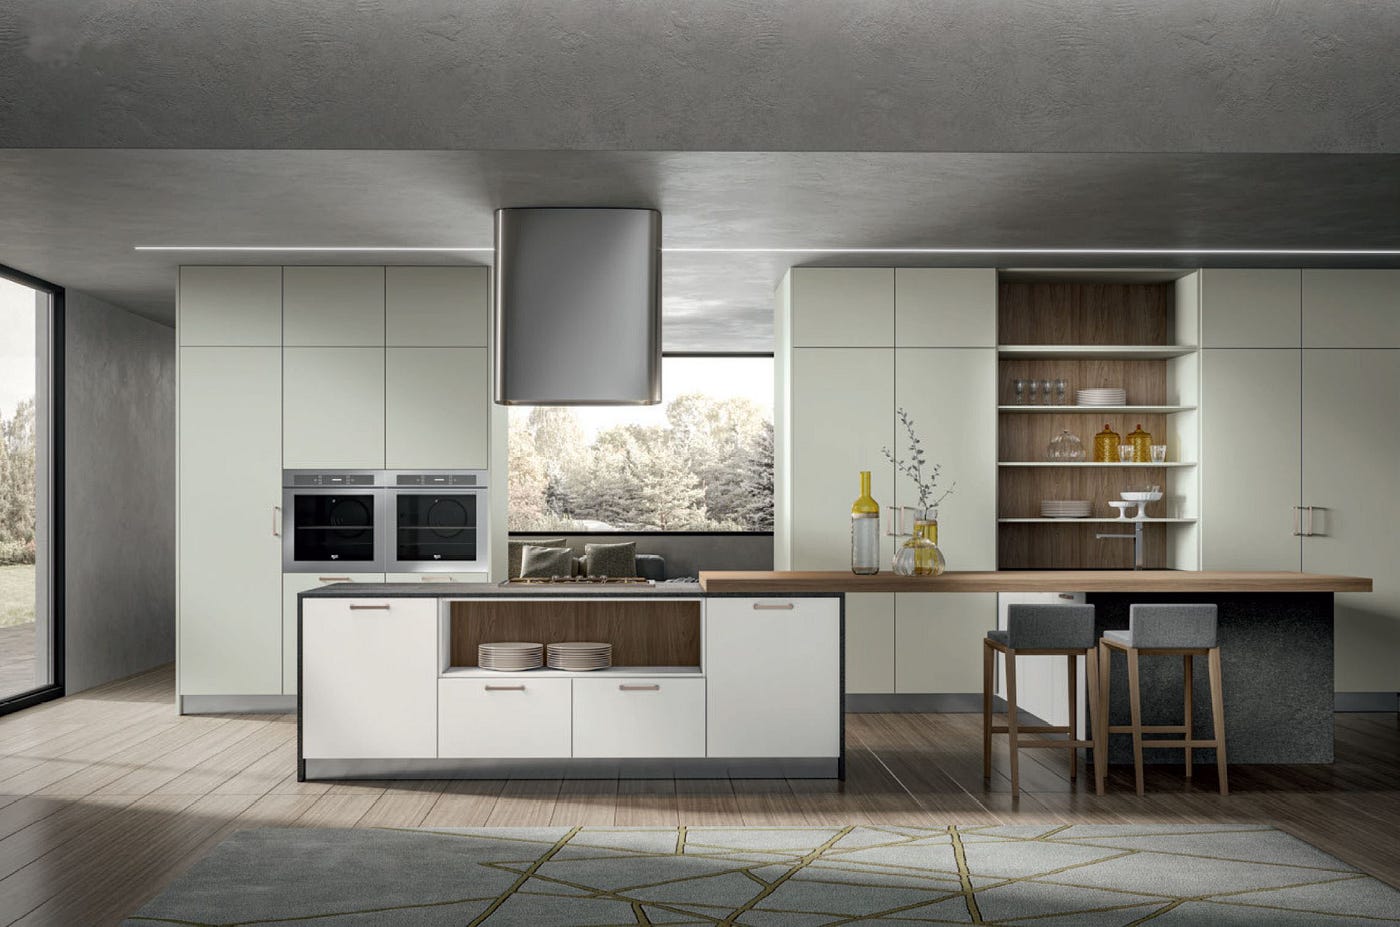 Top 10 Most Influential Kitchen Design Trends from Japan